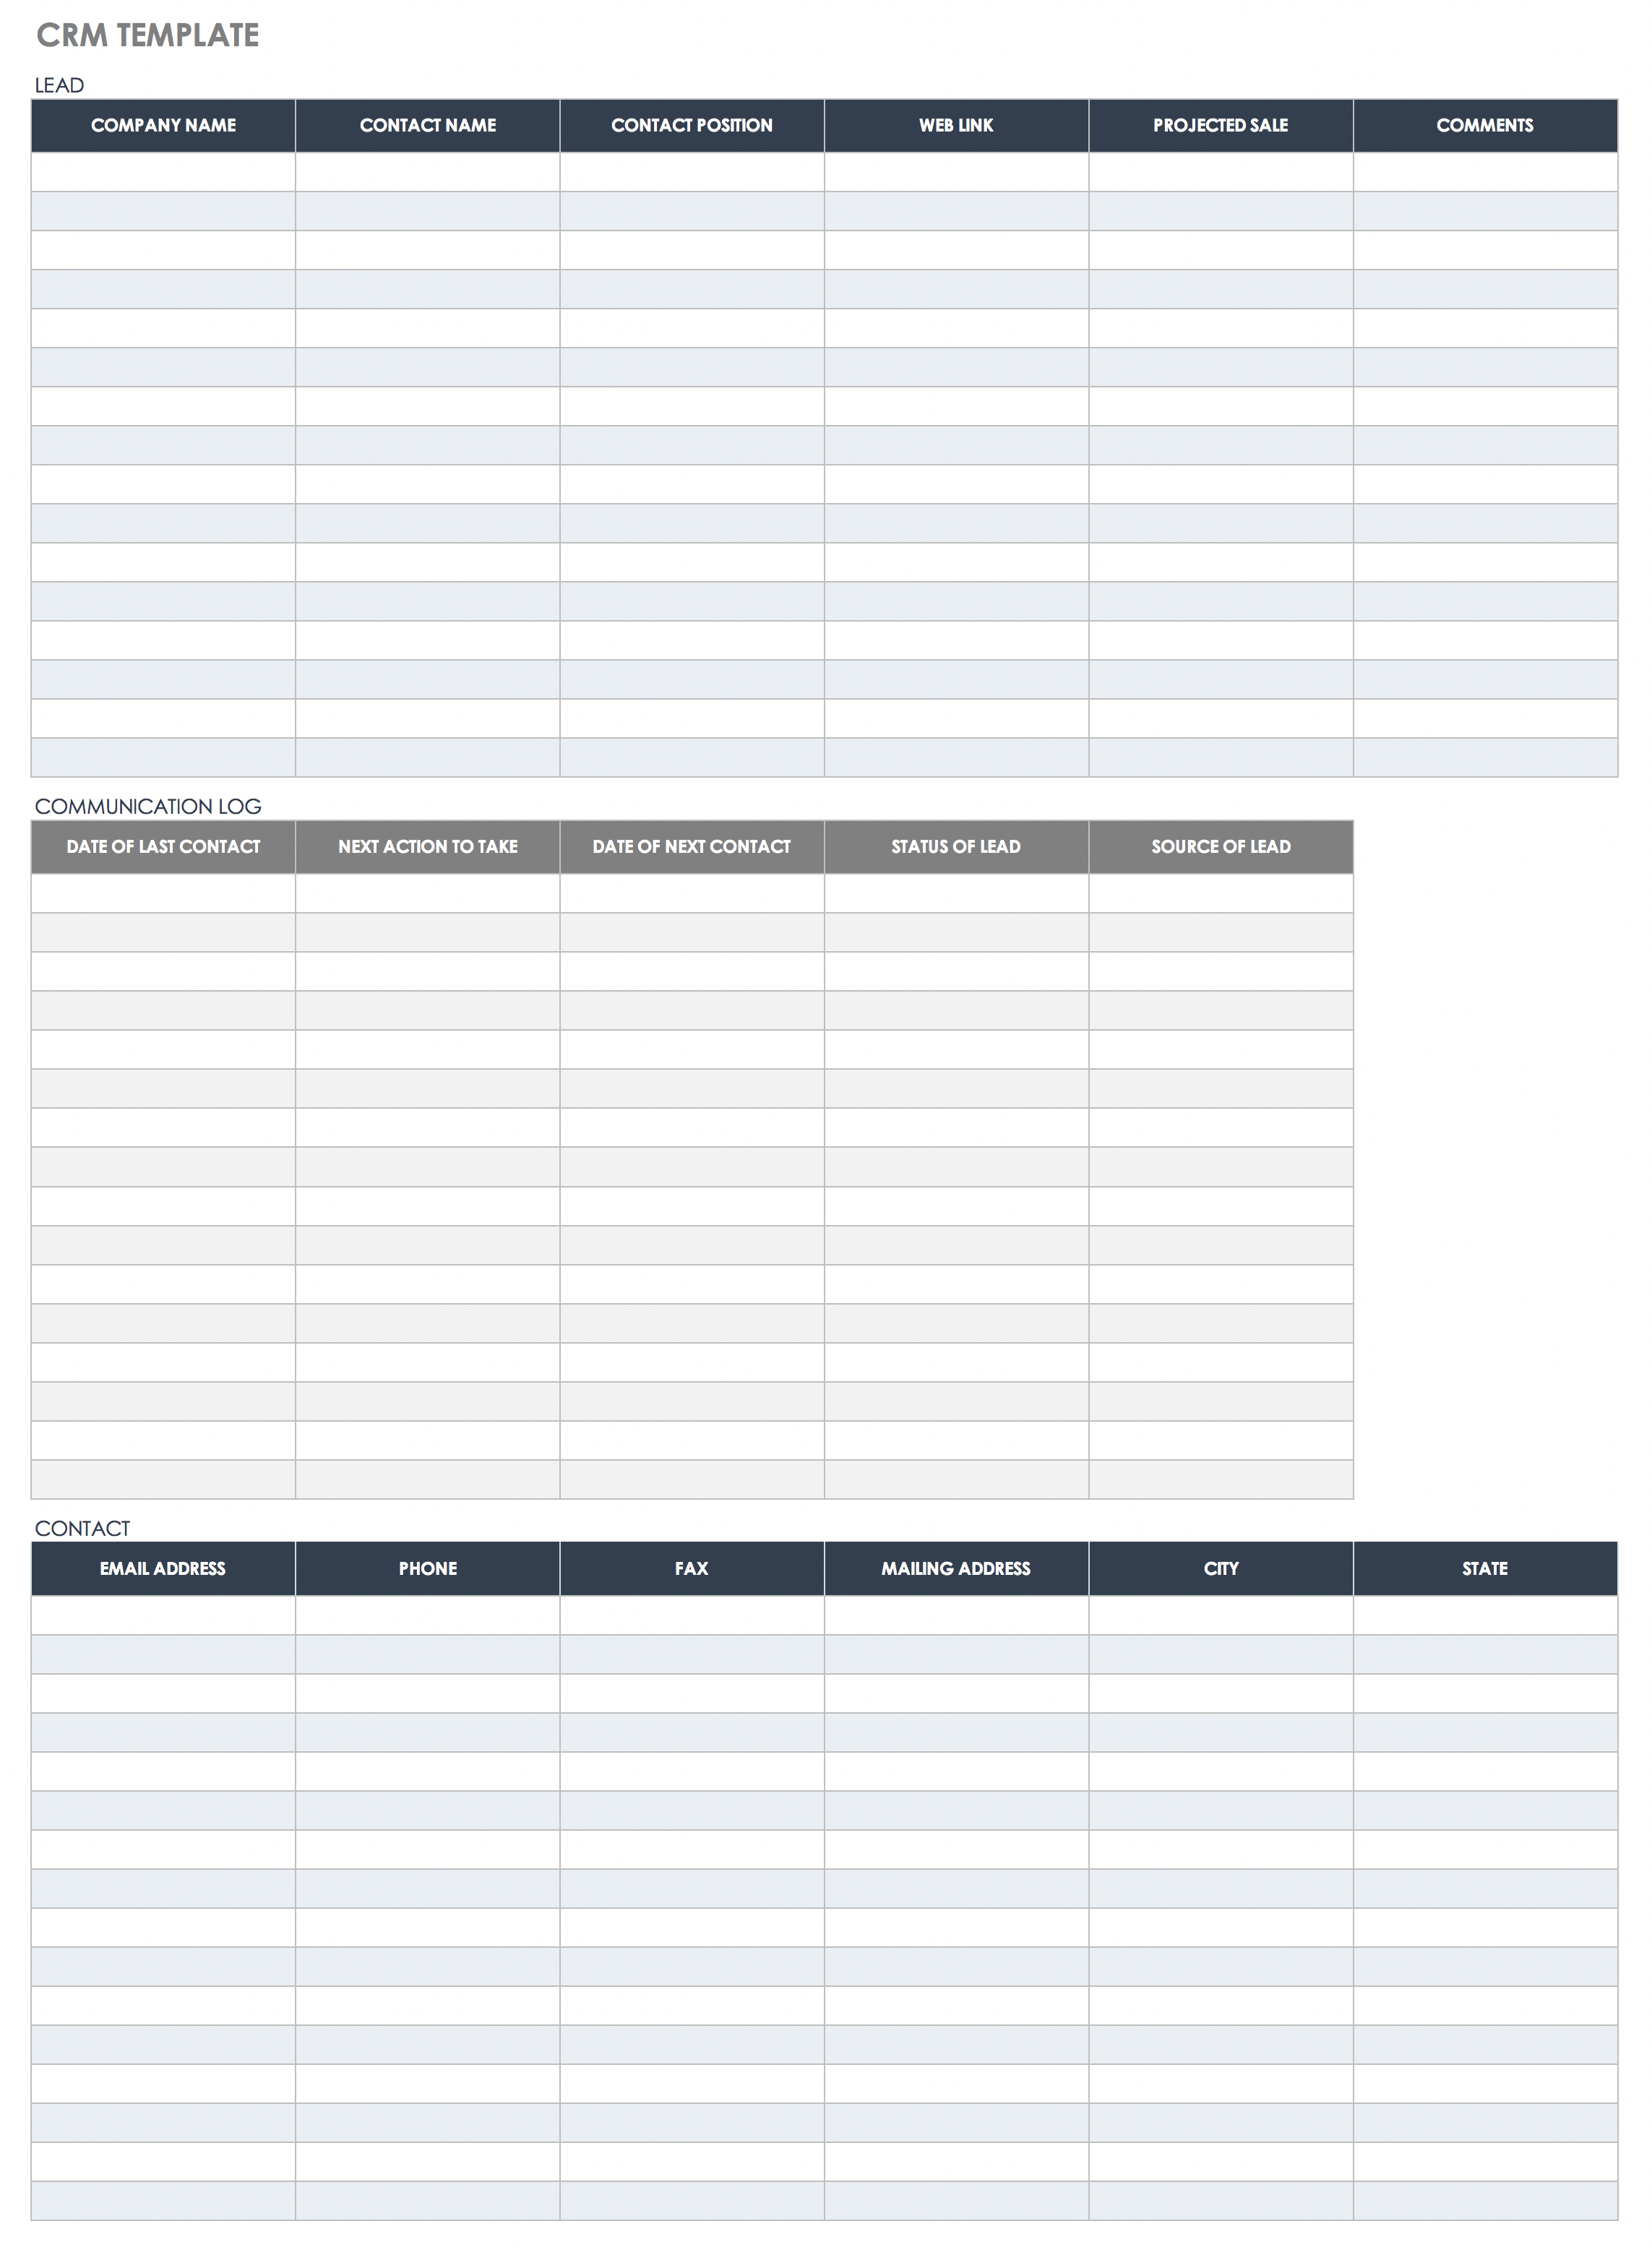 Free Client Management & Tracking Templates  Smartsheet With Sales Notes Template